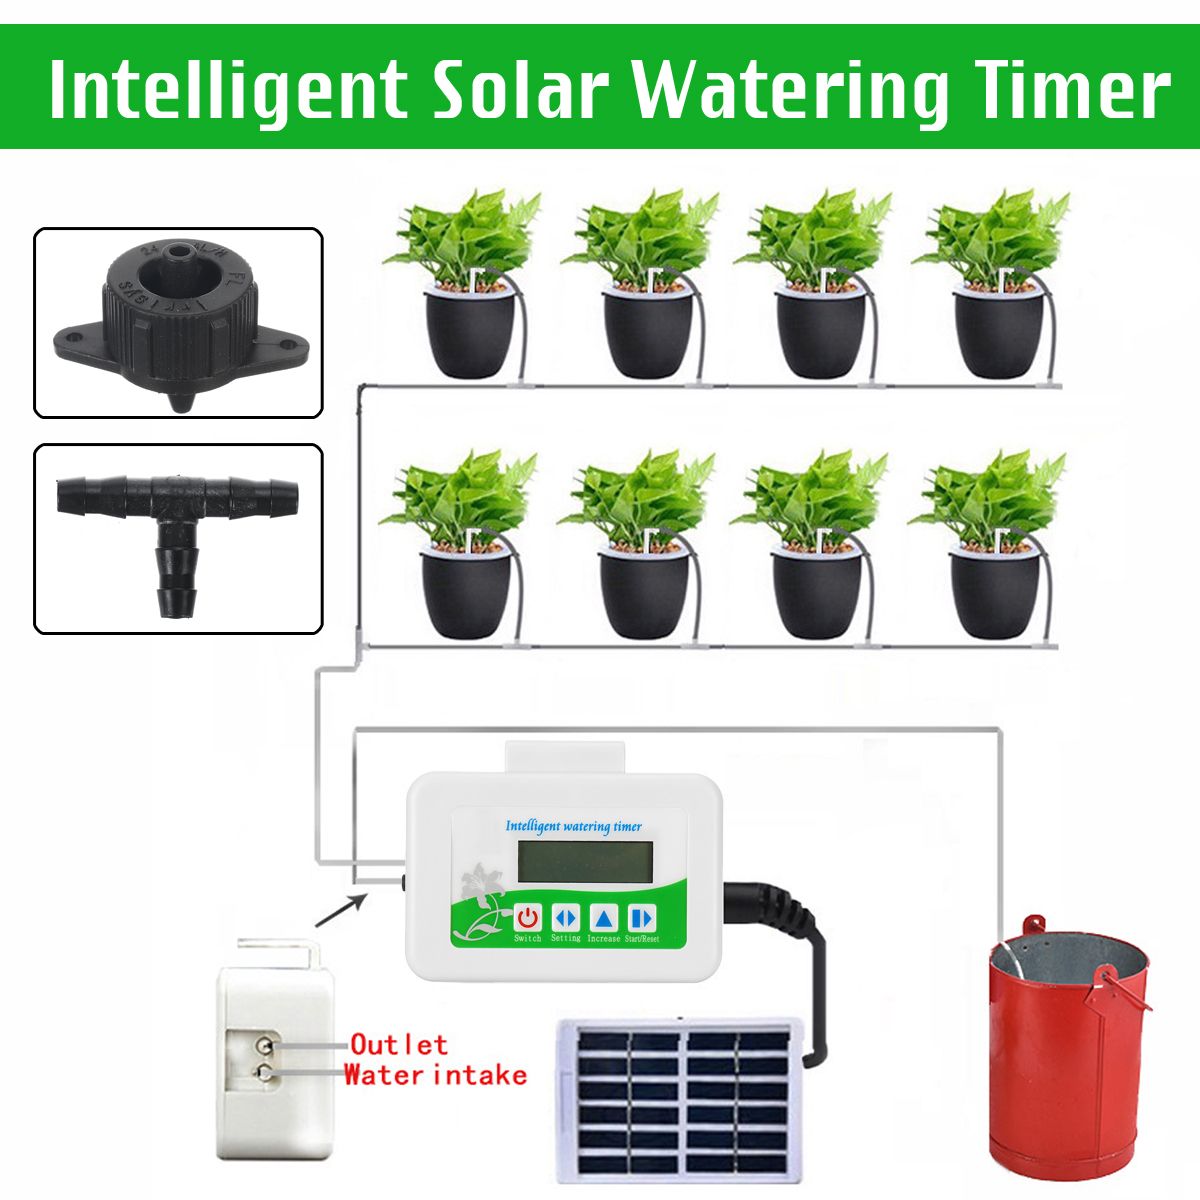 Intelligent-Watering-Timer-Automatic-Solar-Water-Controlle-Irrigation-System-Kit-1711287